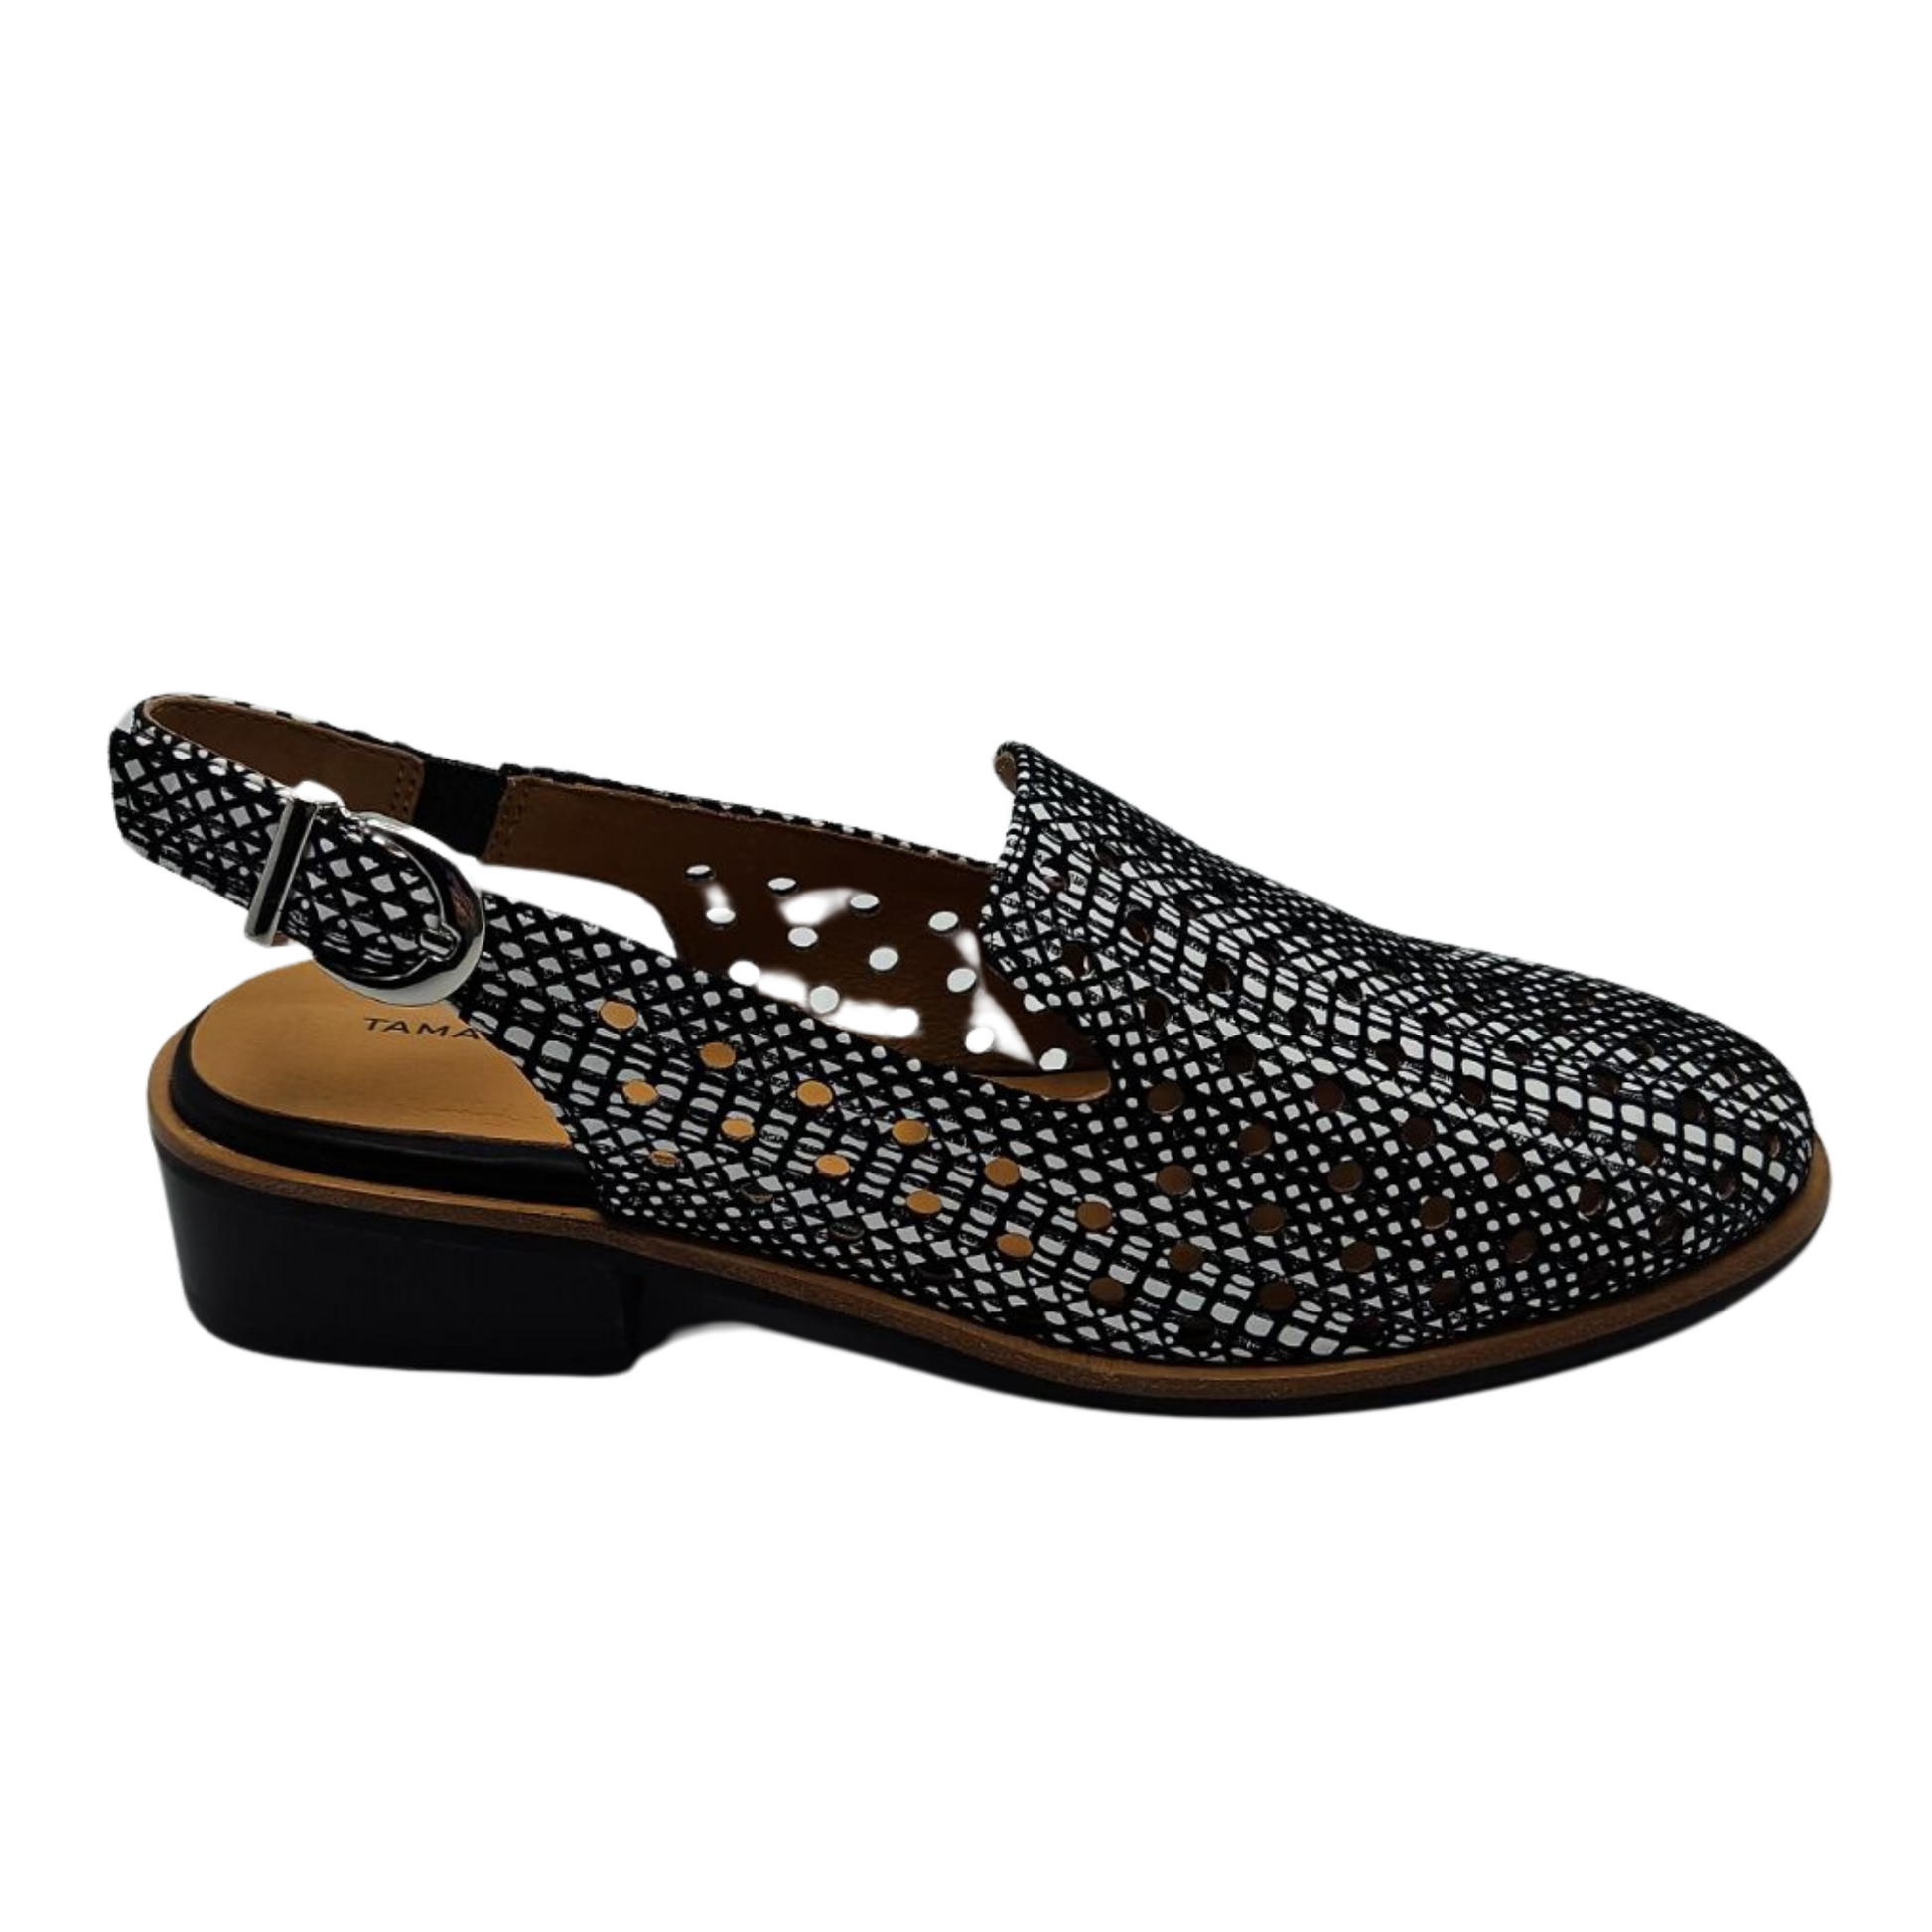 Right facing view of perforated leather shoe with slingback strap, low heel and rounded toe